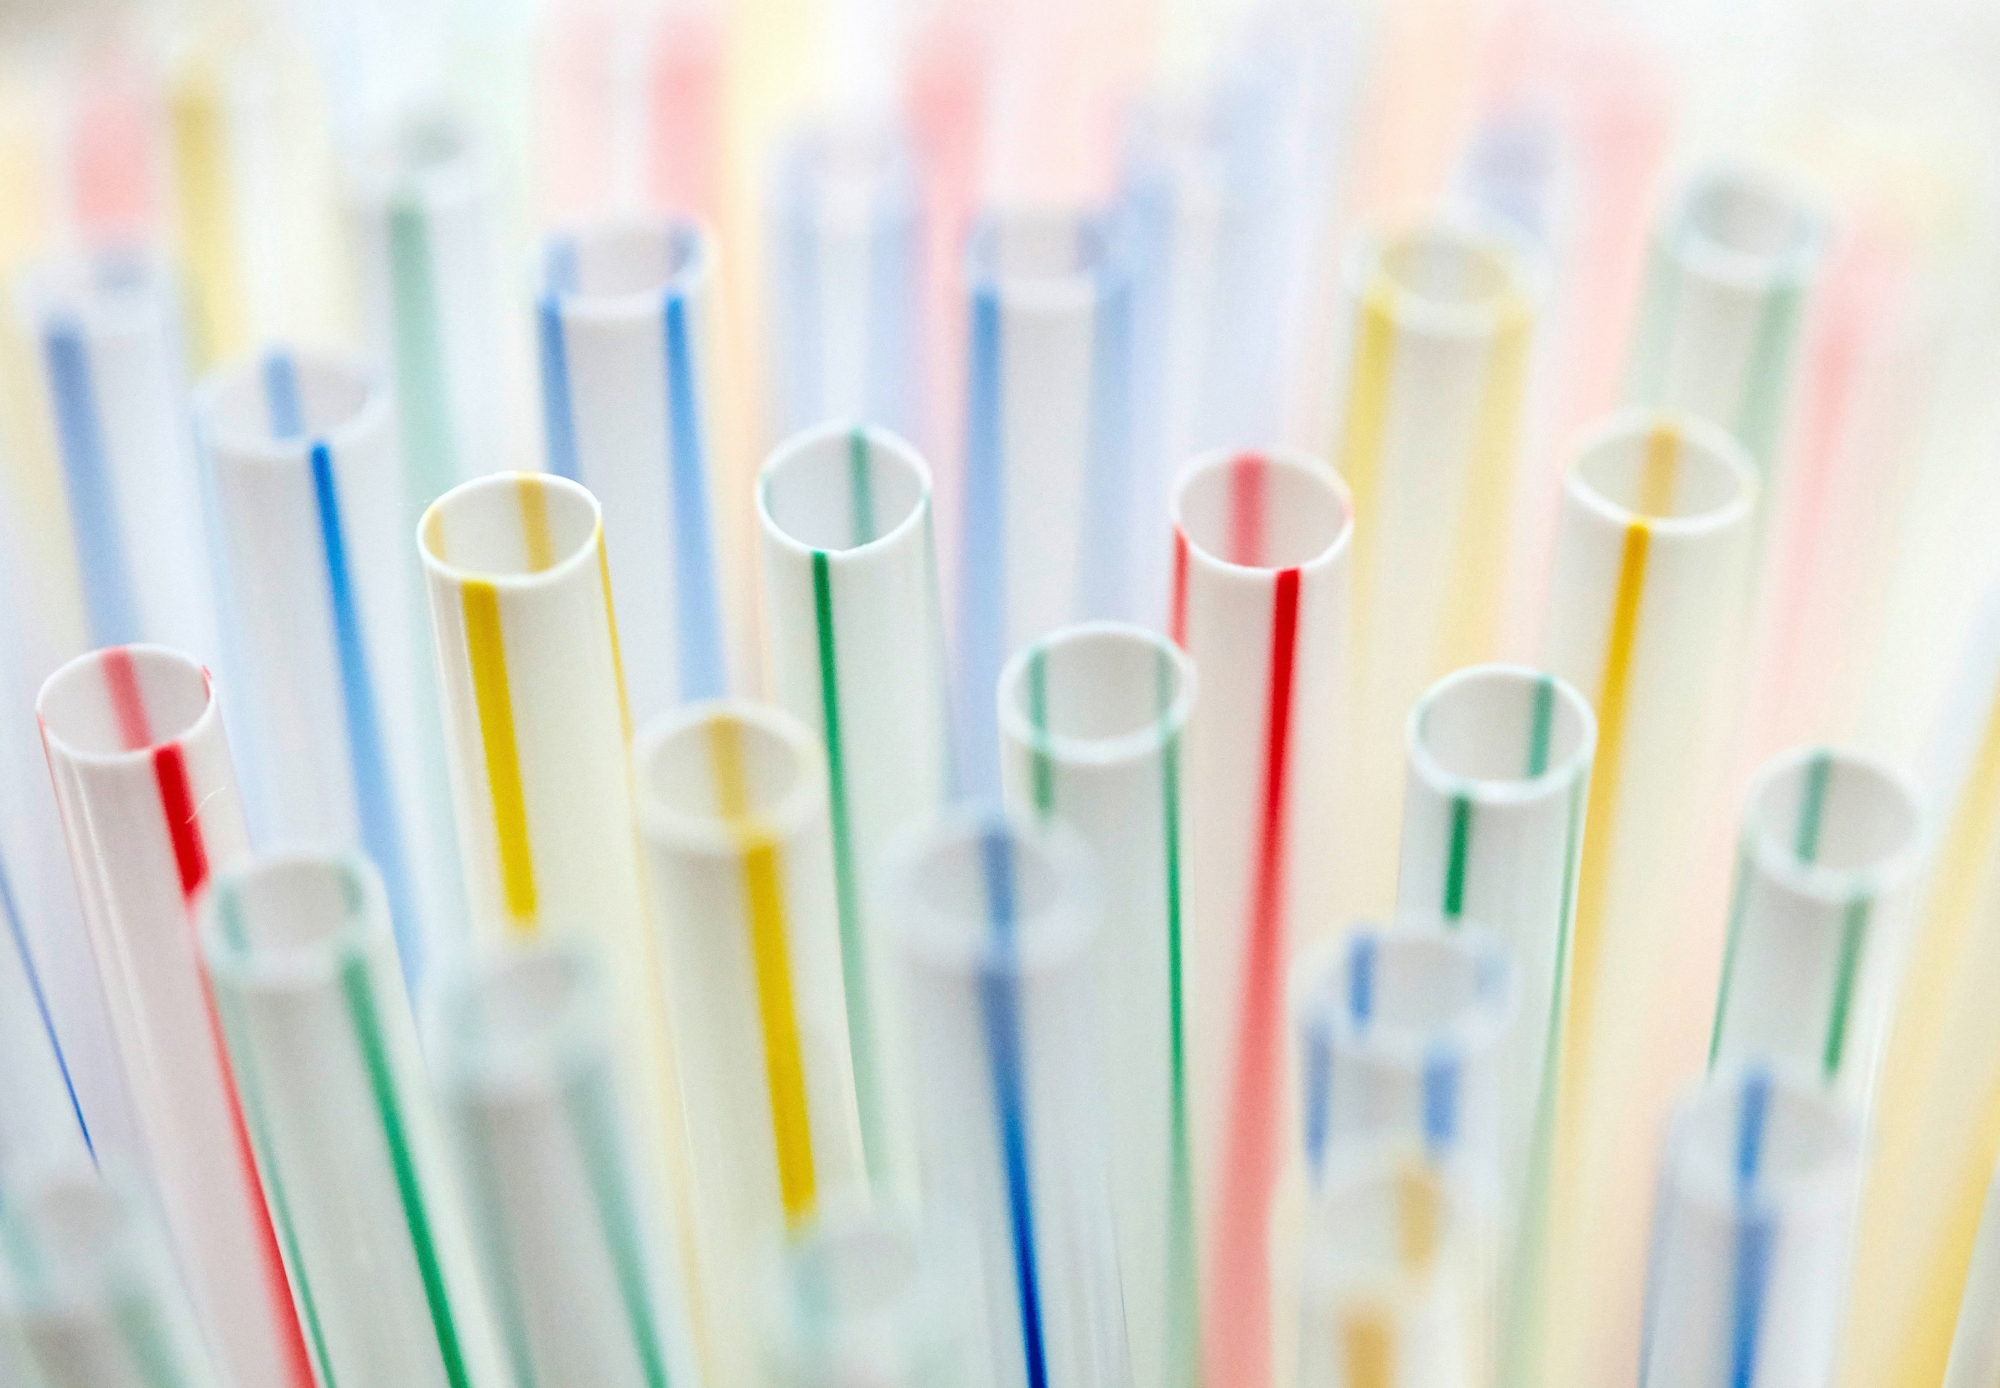 epa06769569 A close-up of plastic straws in Berlin, Germany, 28 May 2018. The EU Commission presented its Plastics Strategy on 28 May 2018 to ban single-use products, like plastic utensils, straws, coffee stirrers and cotton swabs, in the fight against plastic waste which is a main source of environmental pollution because they are used only once, hard to collect for recycling and can kill animals, fish and sea turtles when they swallow plastic straw.  EPA/HAYOUNG JEON GERMANY EU PLASTIC STRATEGY